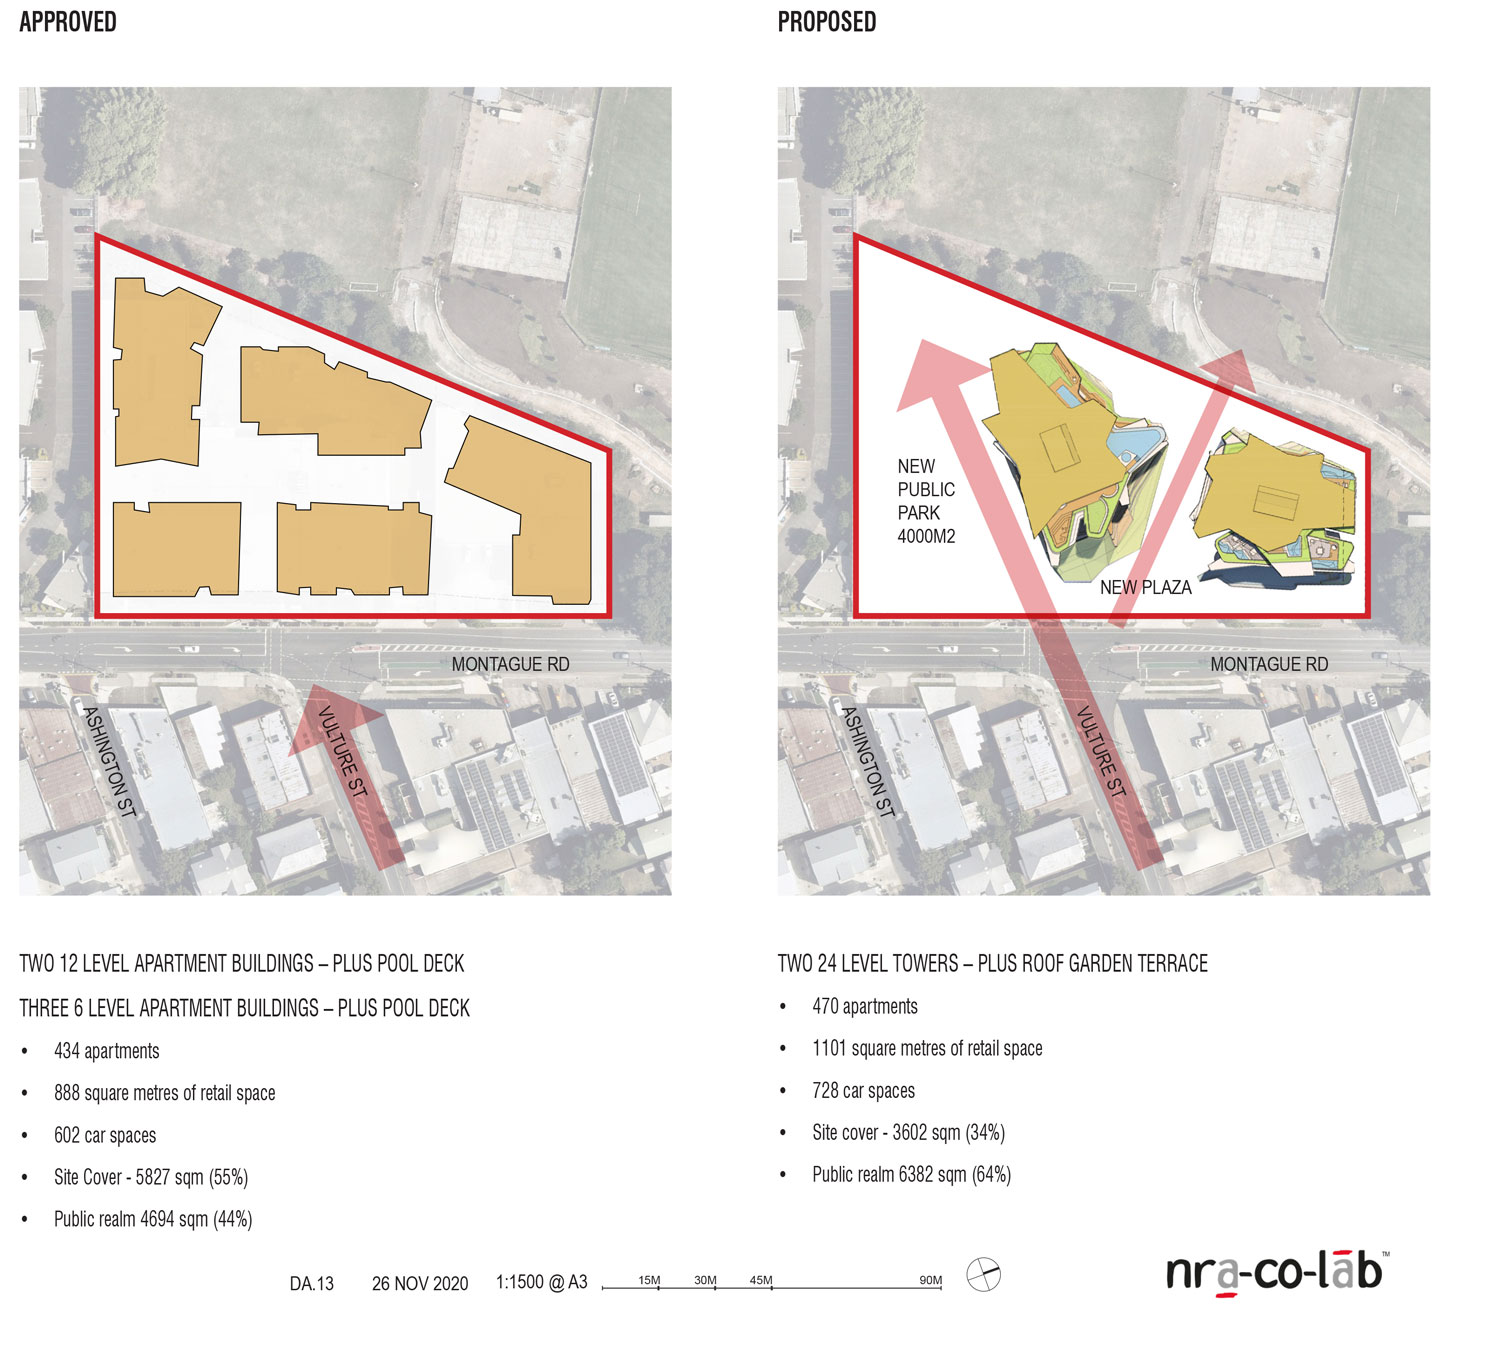 Current approved development application site cover vs proposed design site cover